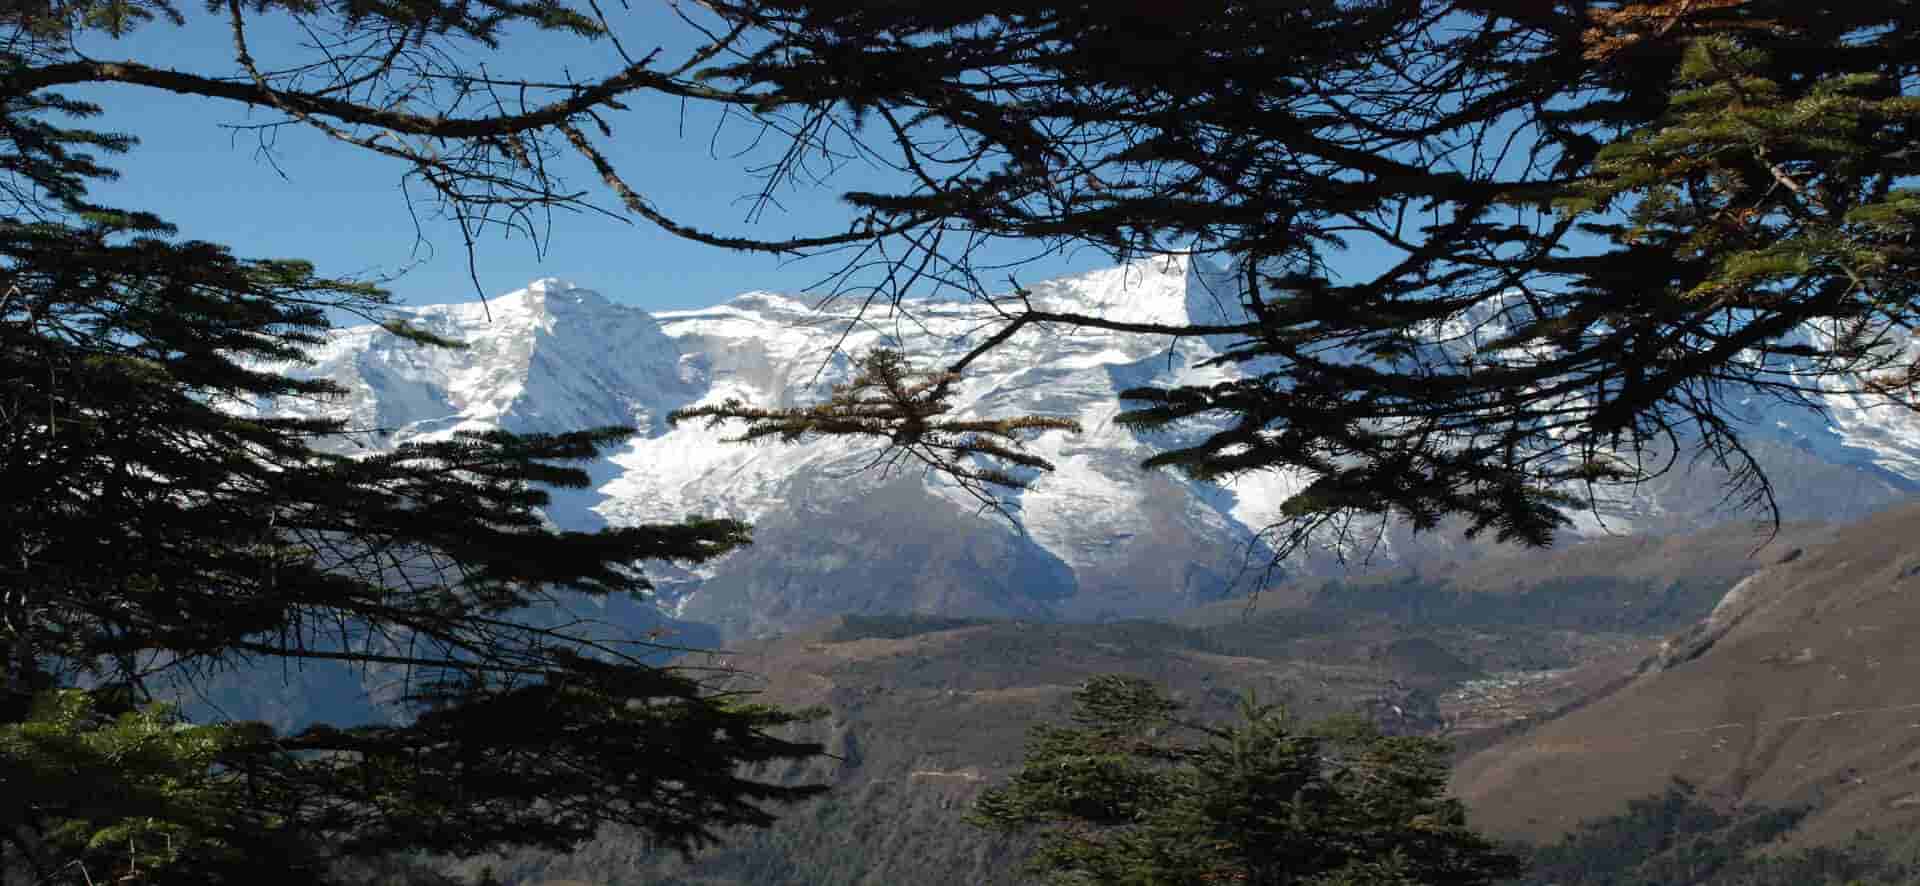 Things to do in Namche Bazaar